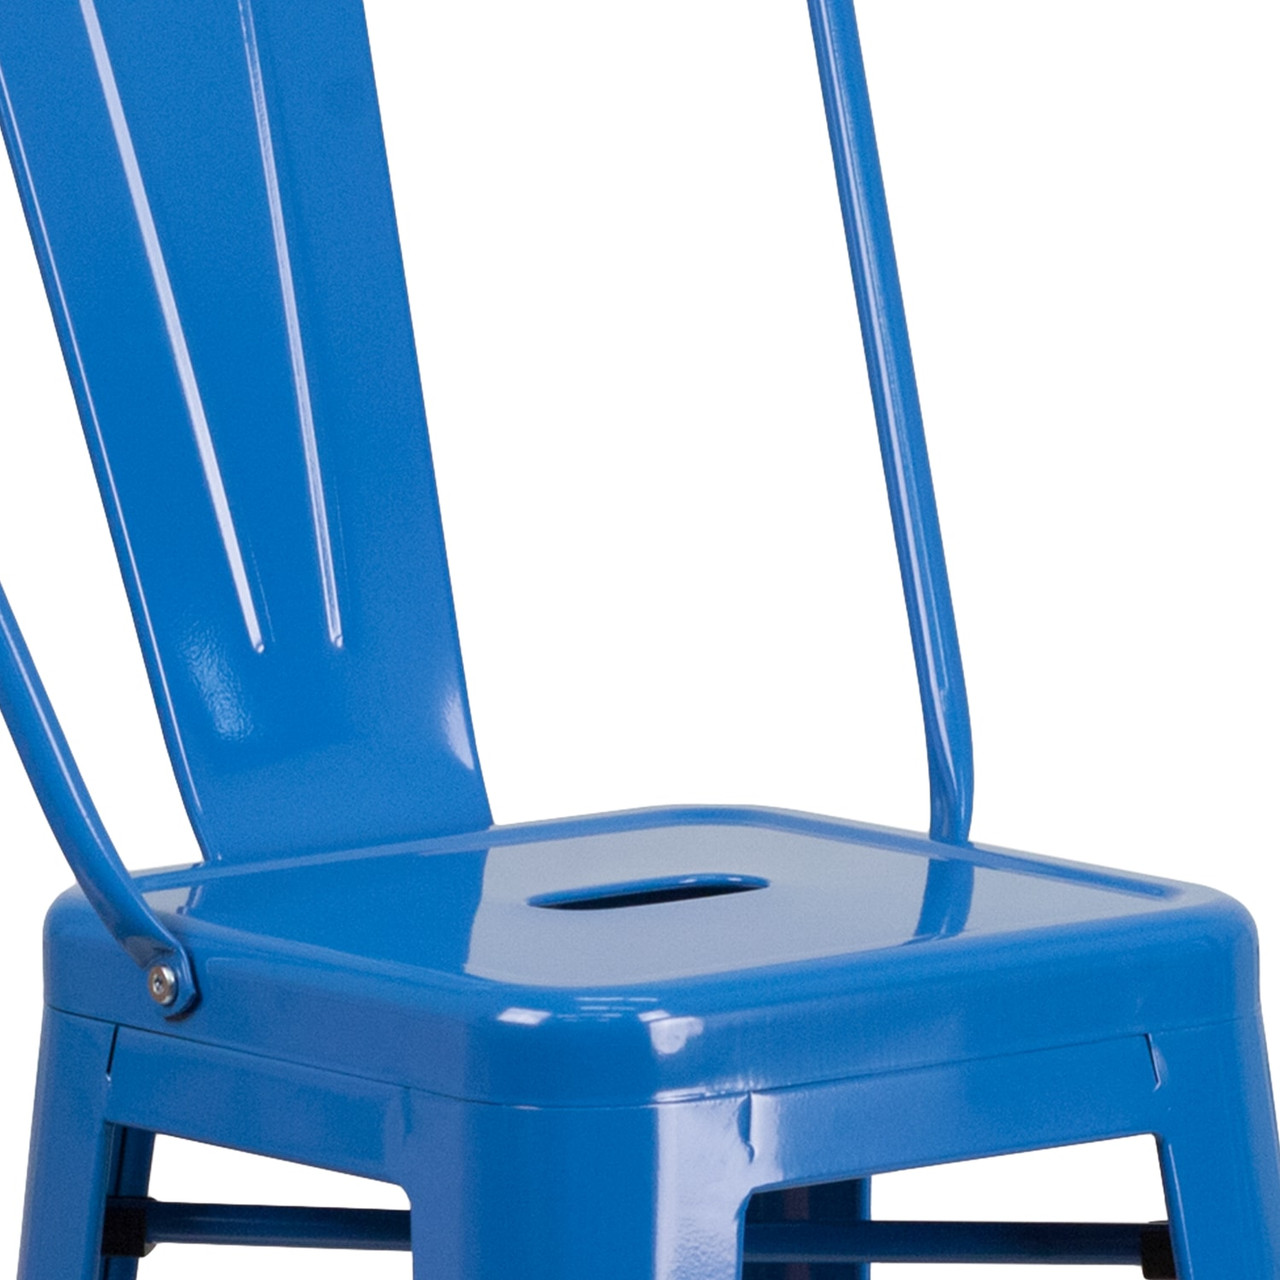 4 Pack 30” High Blue Metal Indoor-Outdoor Barstool with Removable Back